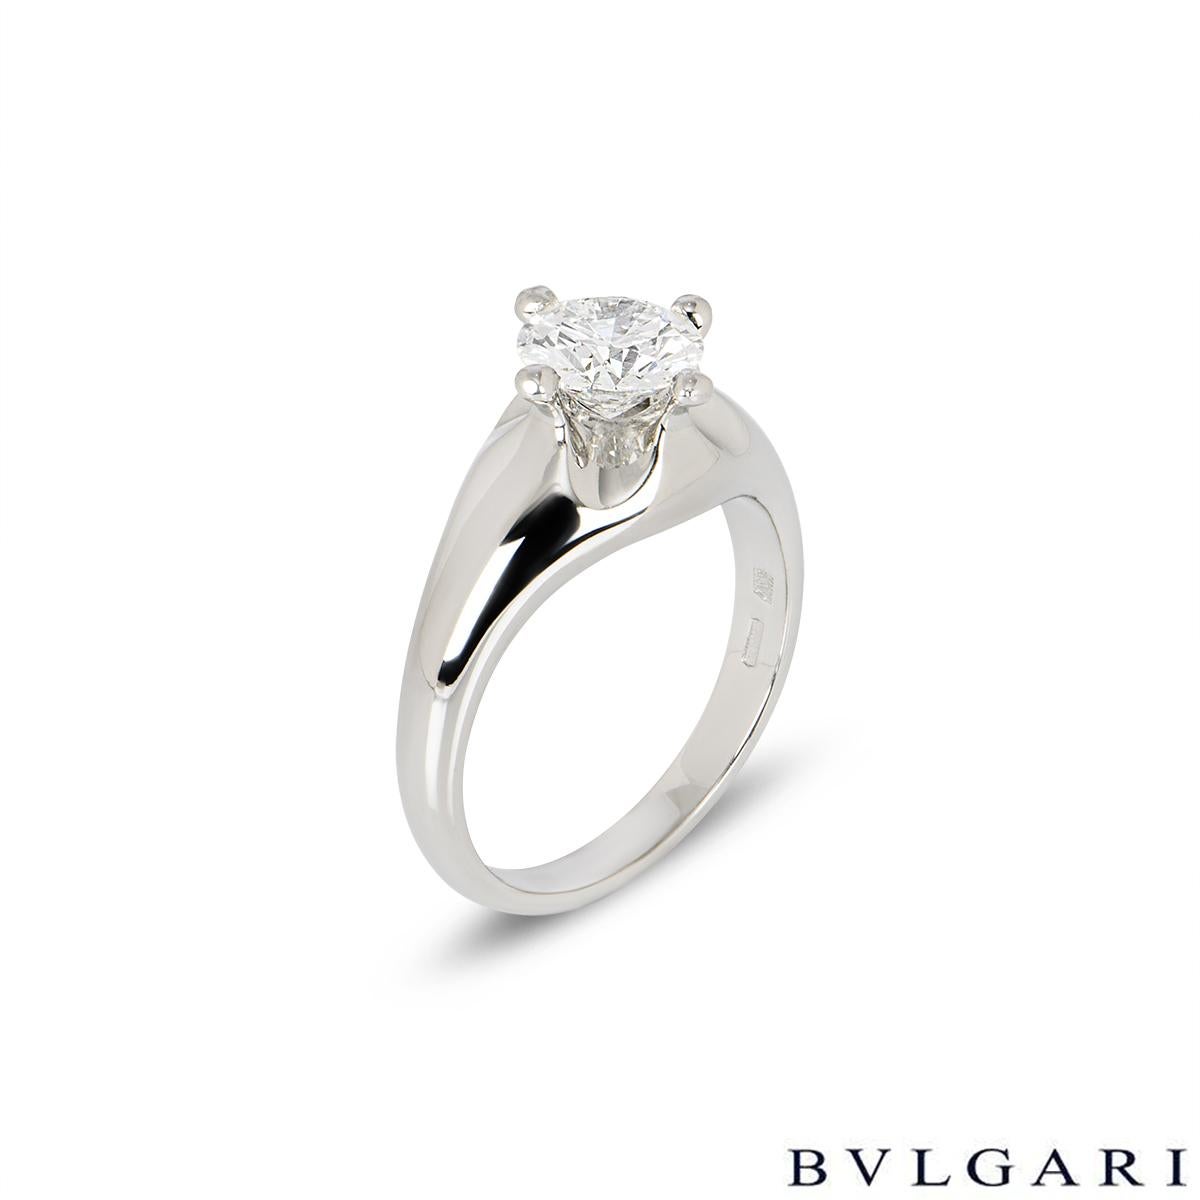 A stunning diamond single stone ring in platinum by Bvlgari. The ring is set to the centre with a 1.11ct round brilliant cut diamond in a raised four claw compass setting, F in colour and VVS1 in clarity. The tapered 8mm ring is currently a size UK